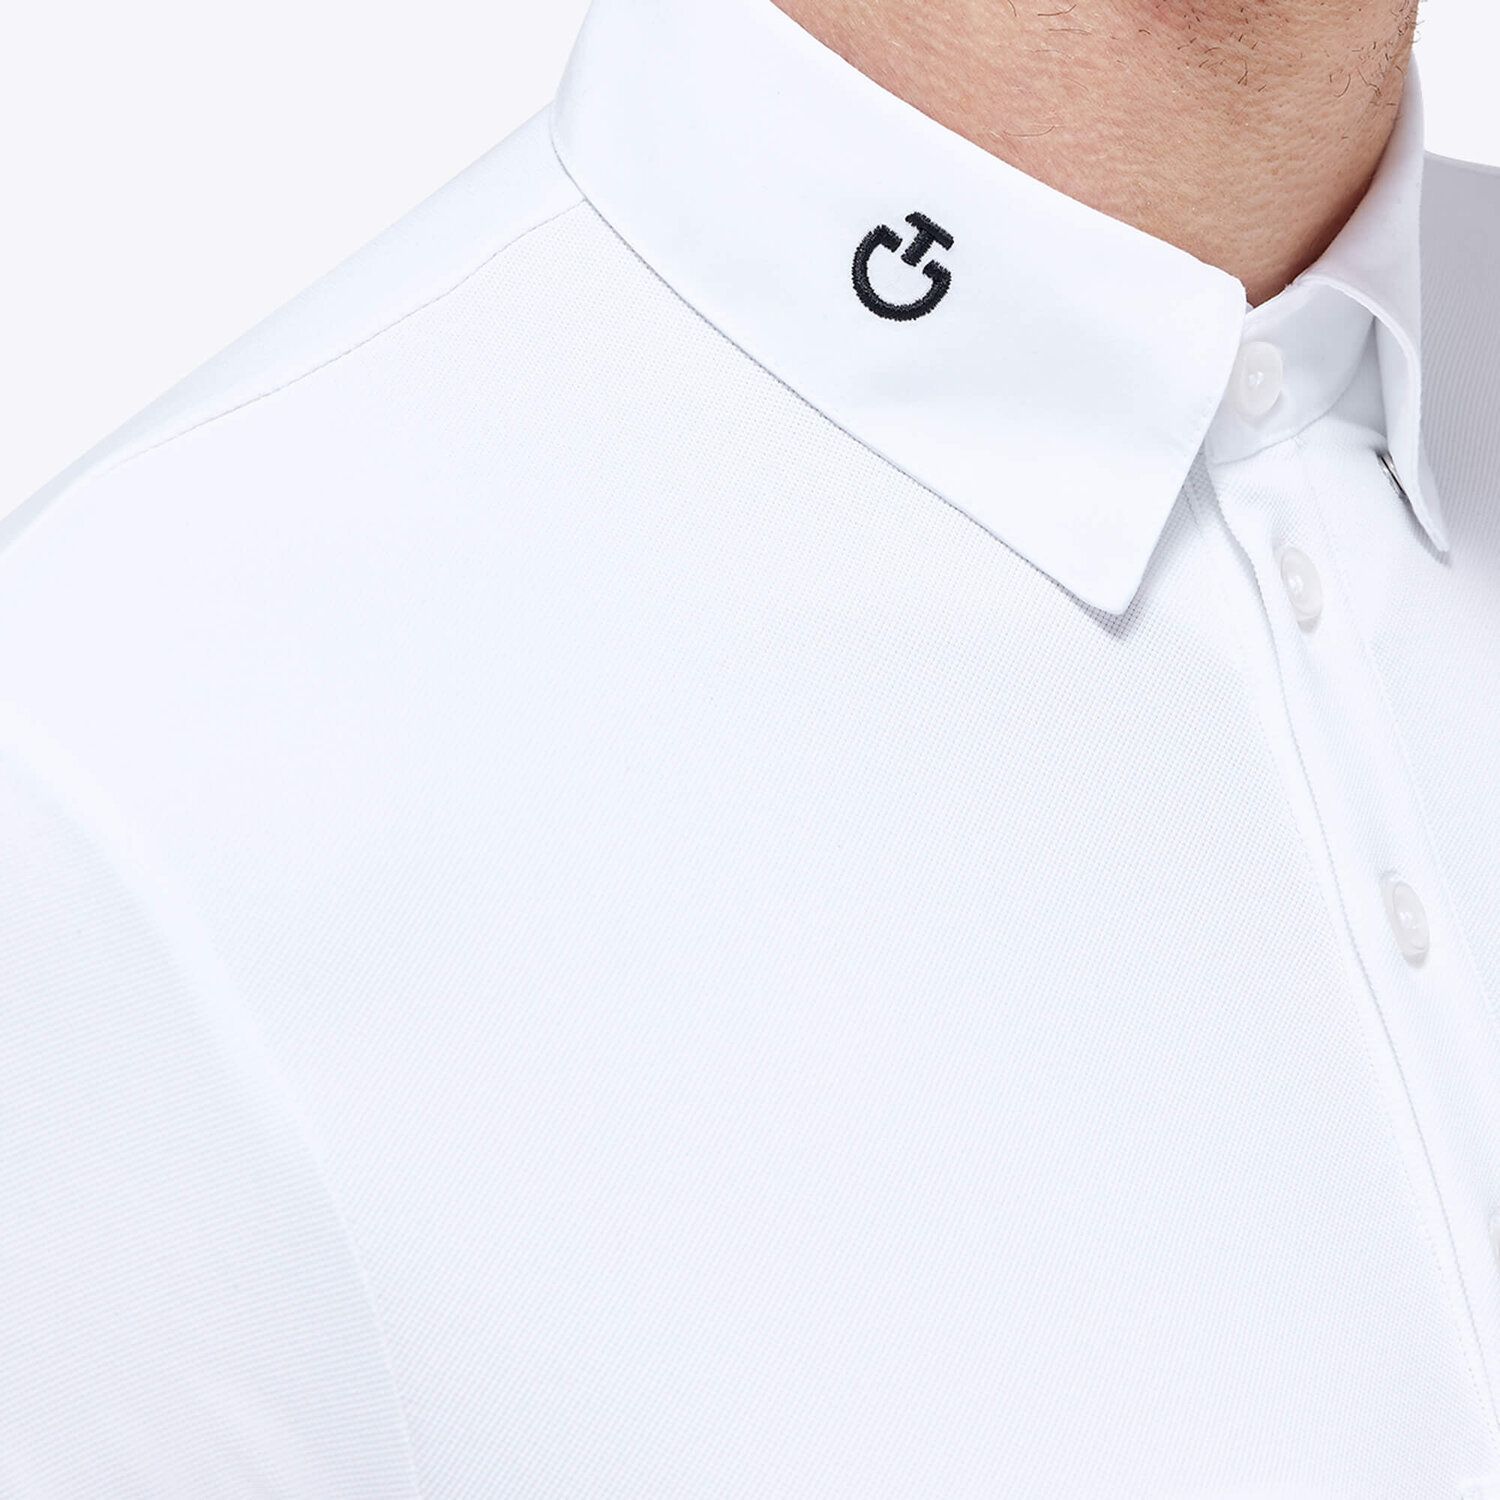 Cavalleria Toscana Men’s performance piqué knit polo shirt with buttons WHITE-5